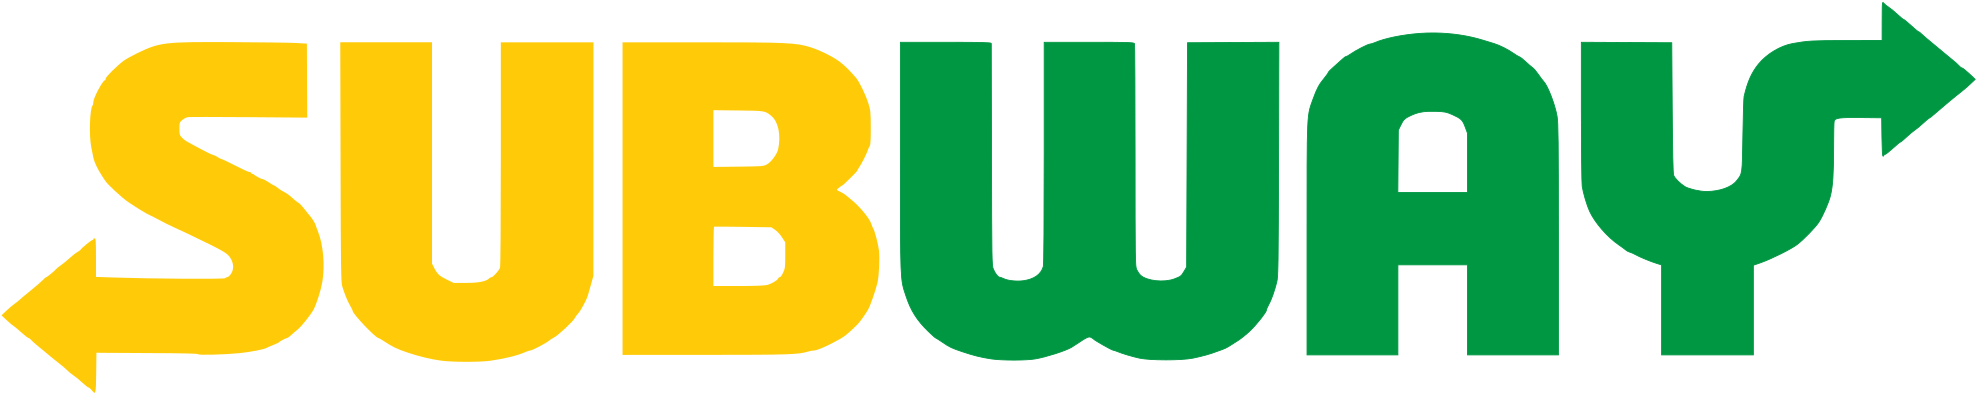 Subway Is Located In The University Pavilion - Subway Logo 2017 (2833x565)